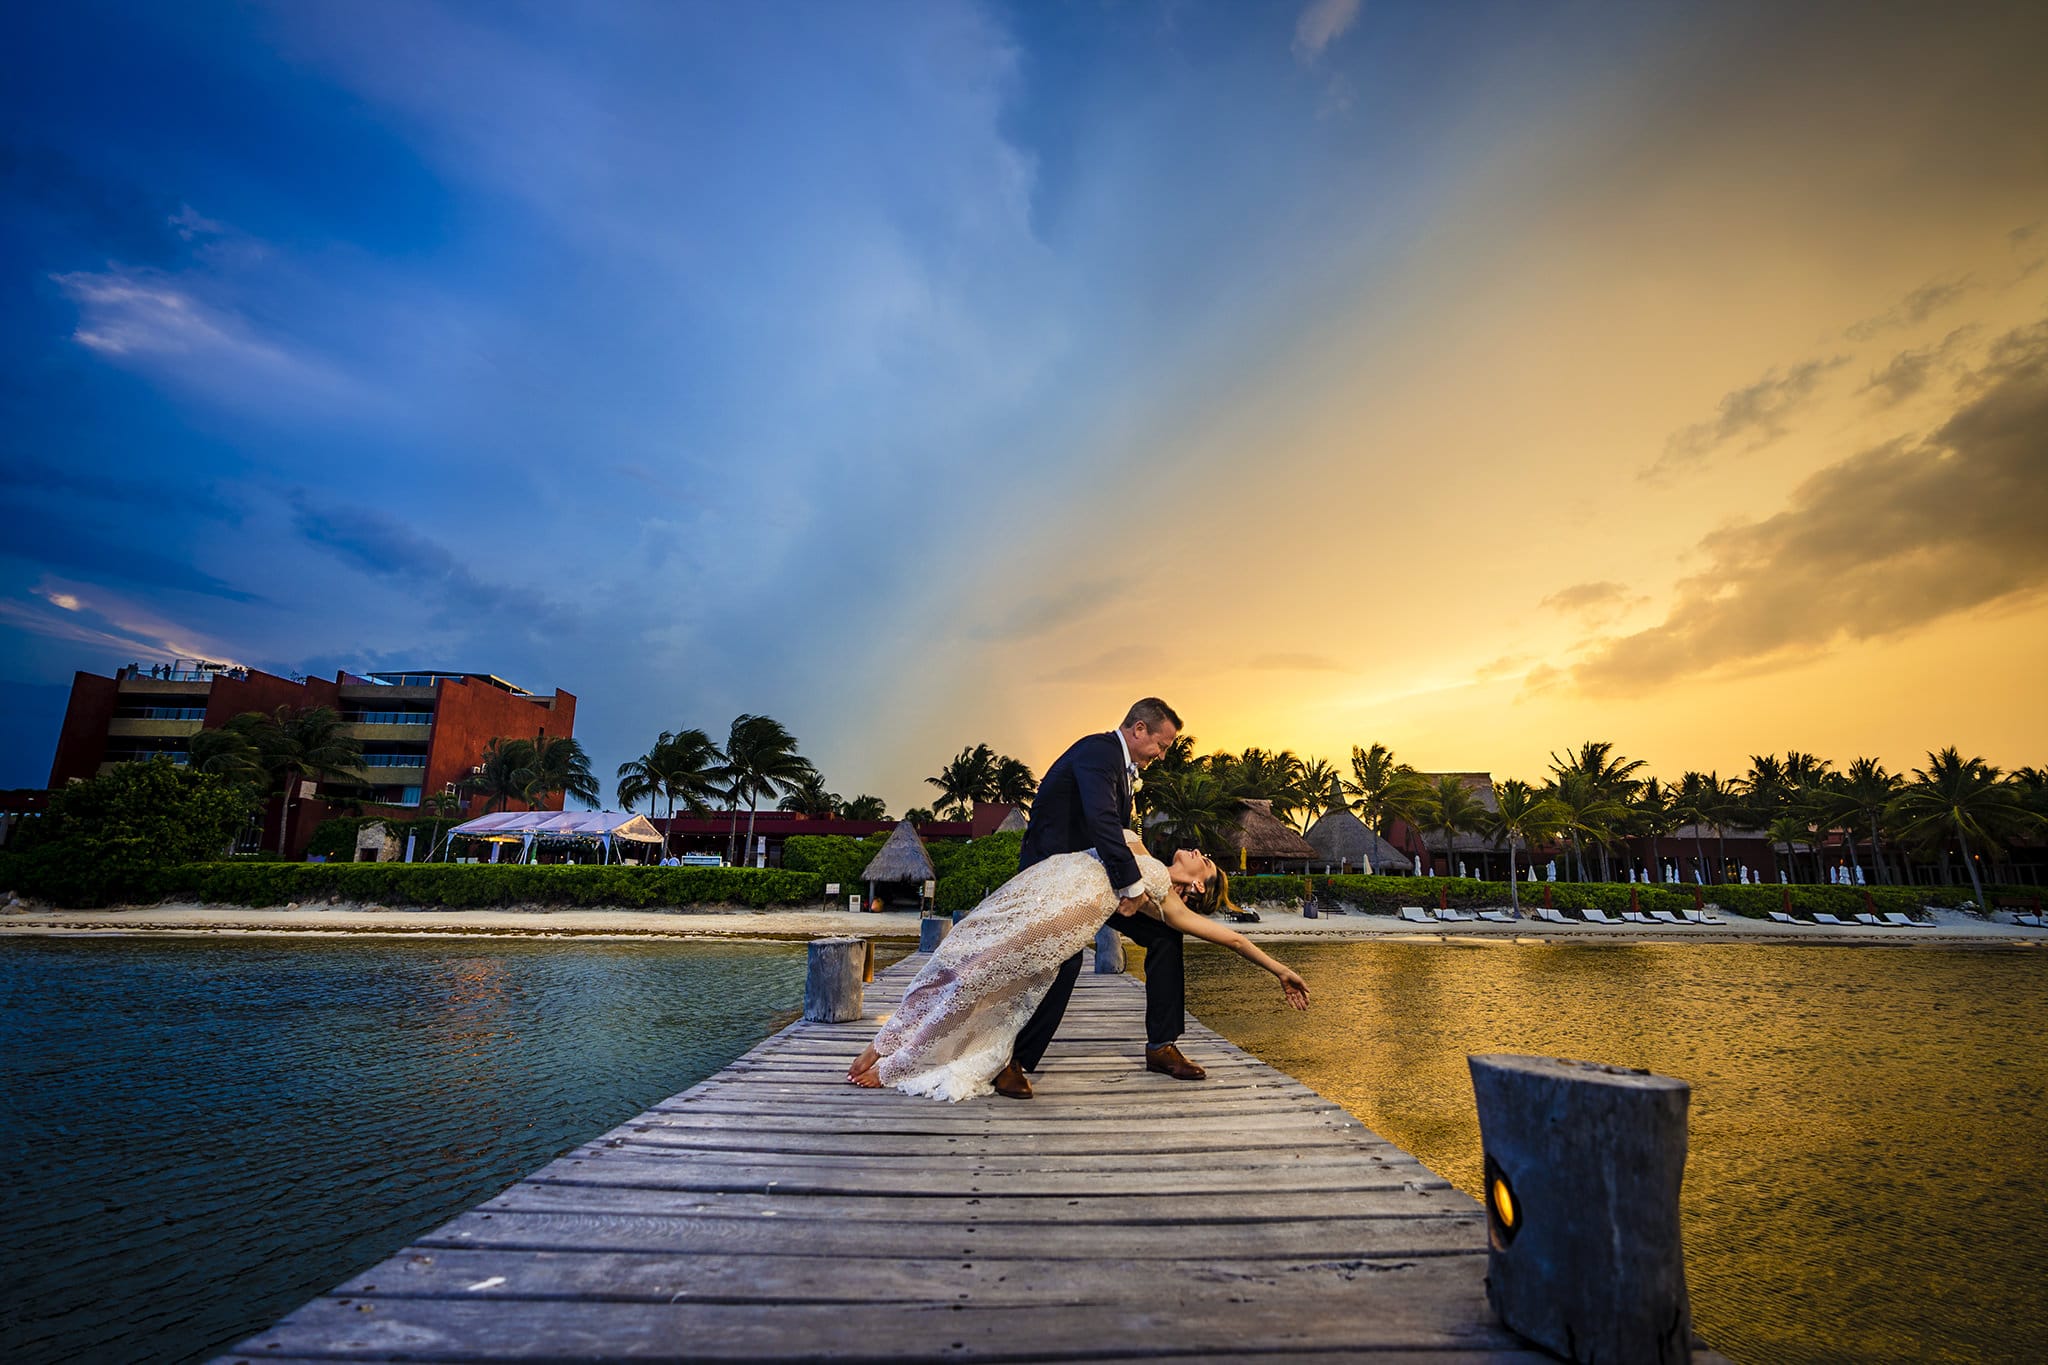 Groom dipping bride on dock at sunset